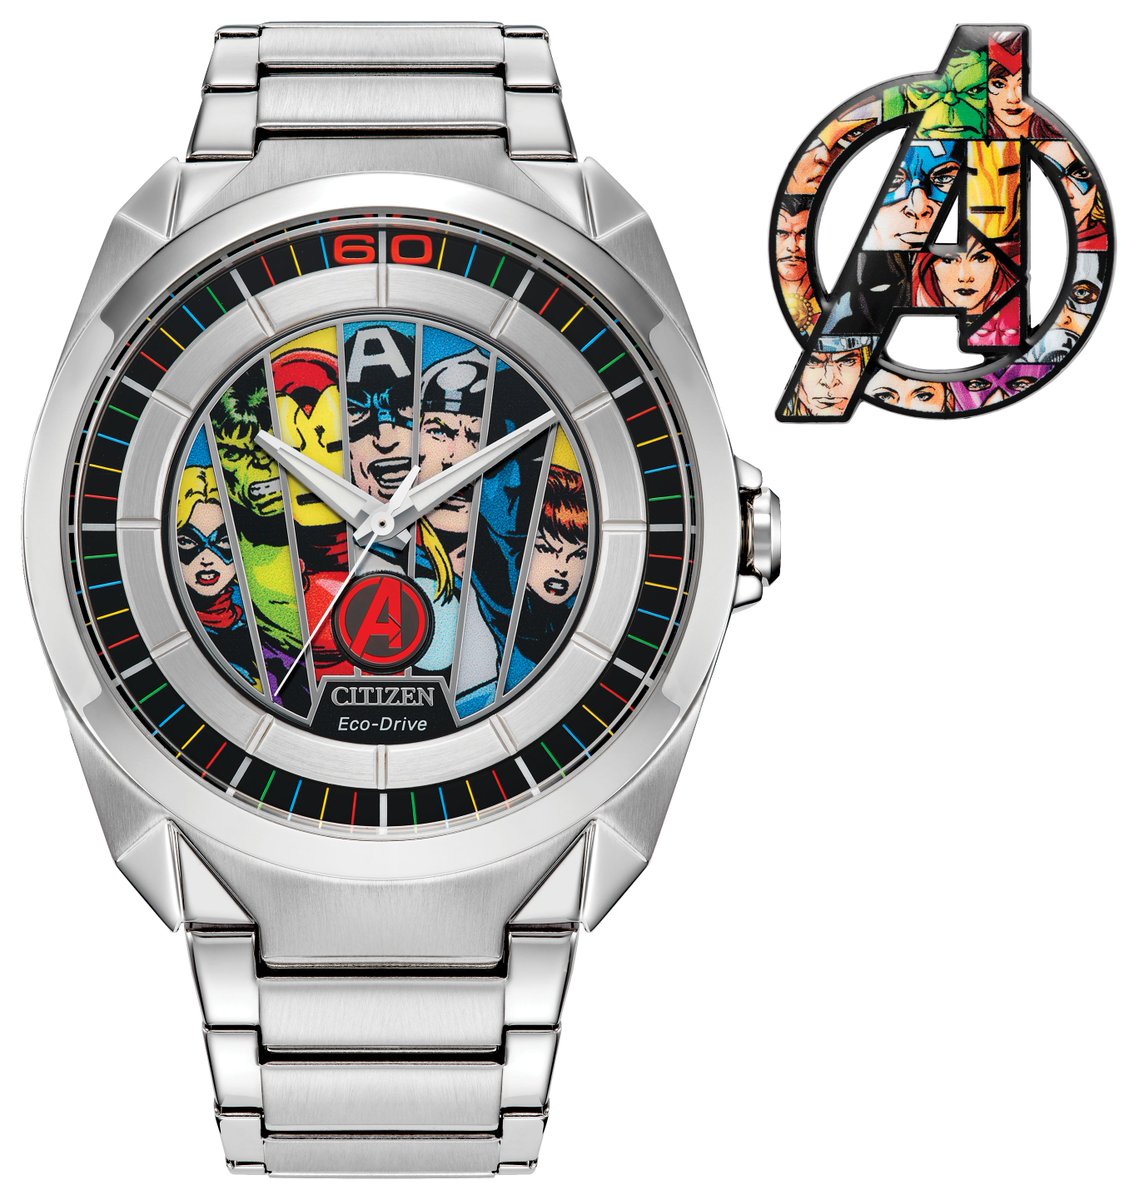 The ultimate collectible for Marvel super-fans.

Shop high quality watches like Citizen at the best jewelry shop in St. Maarten with Majesty Jewelers: majestyjewelers.com/citizen-watches

#stmaarten #sxm #bestjewelryshop #bestjewelrystore #watch #avengers #marvel #citizen #menswatch